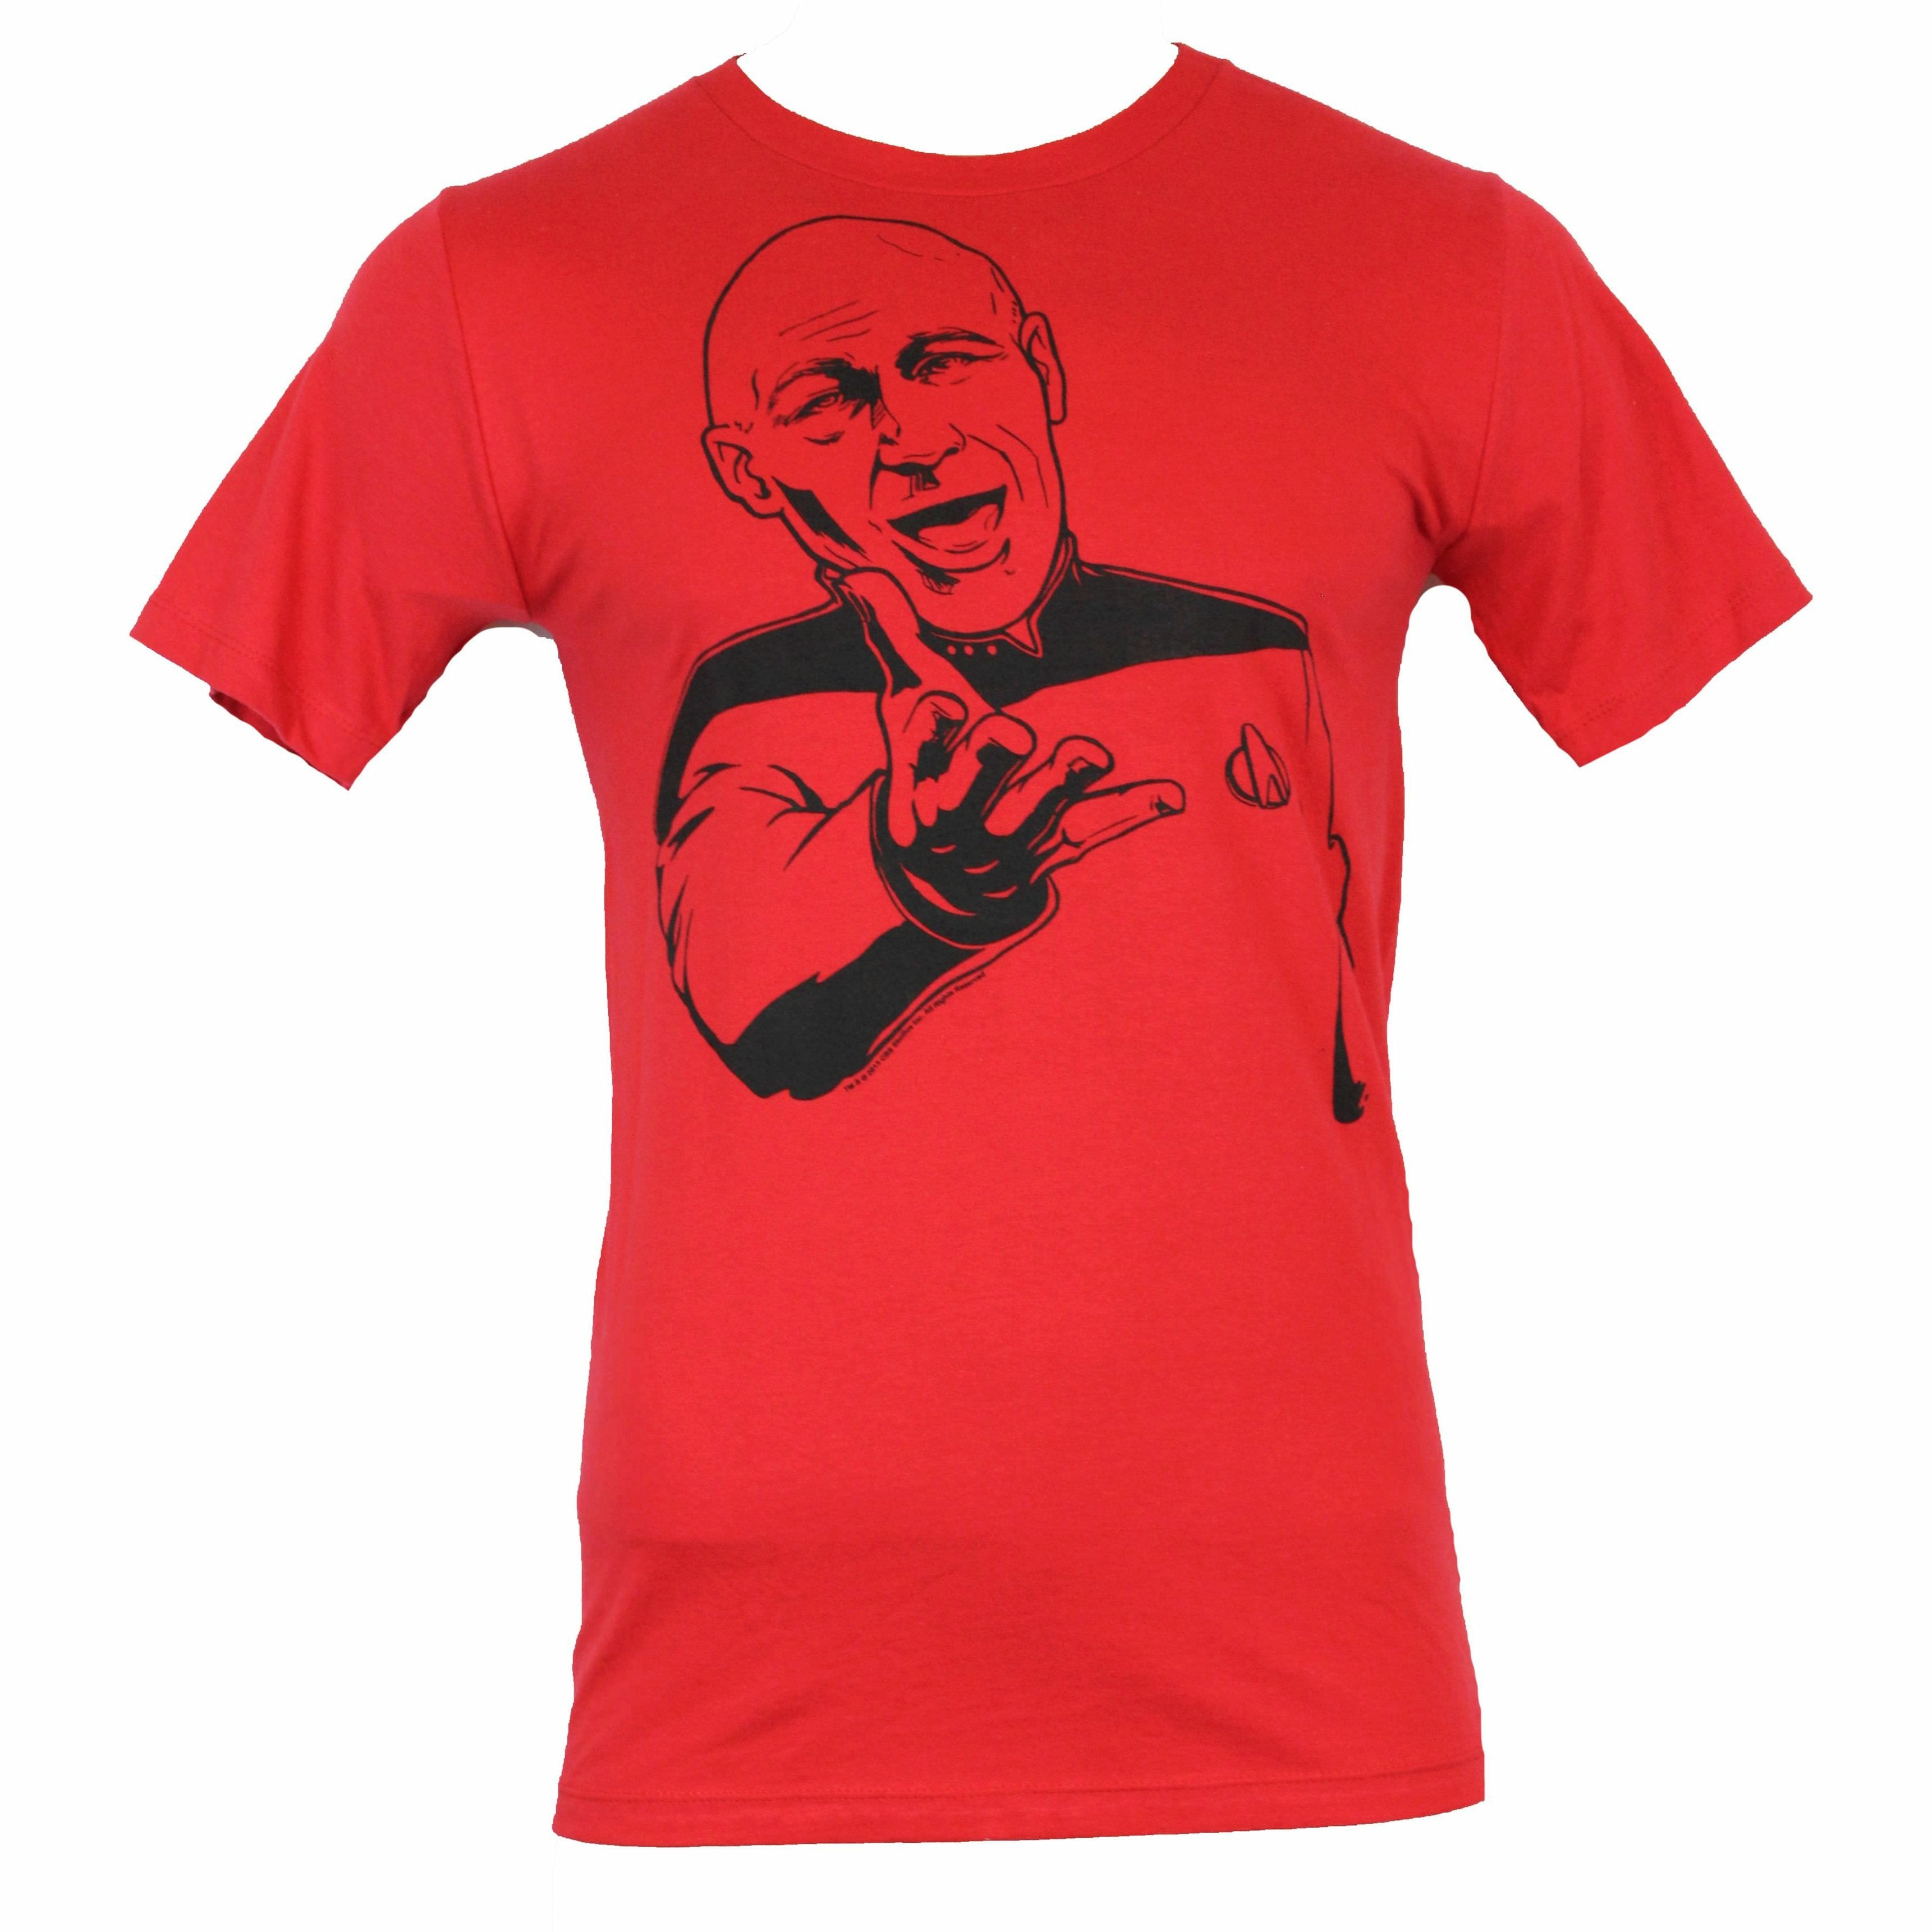 Star Trek The Next Generation Picard Come On Mens Red T-Shirt